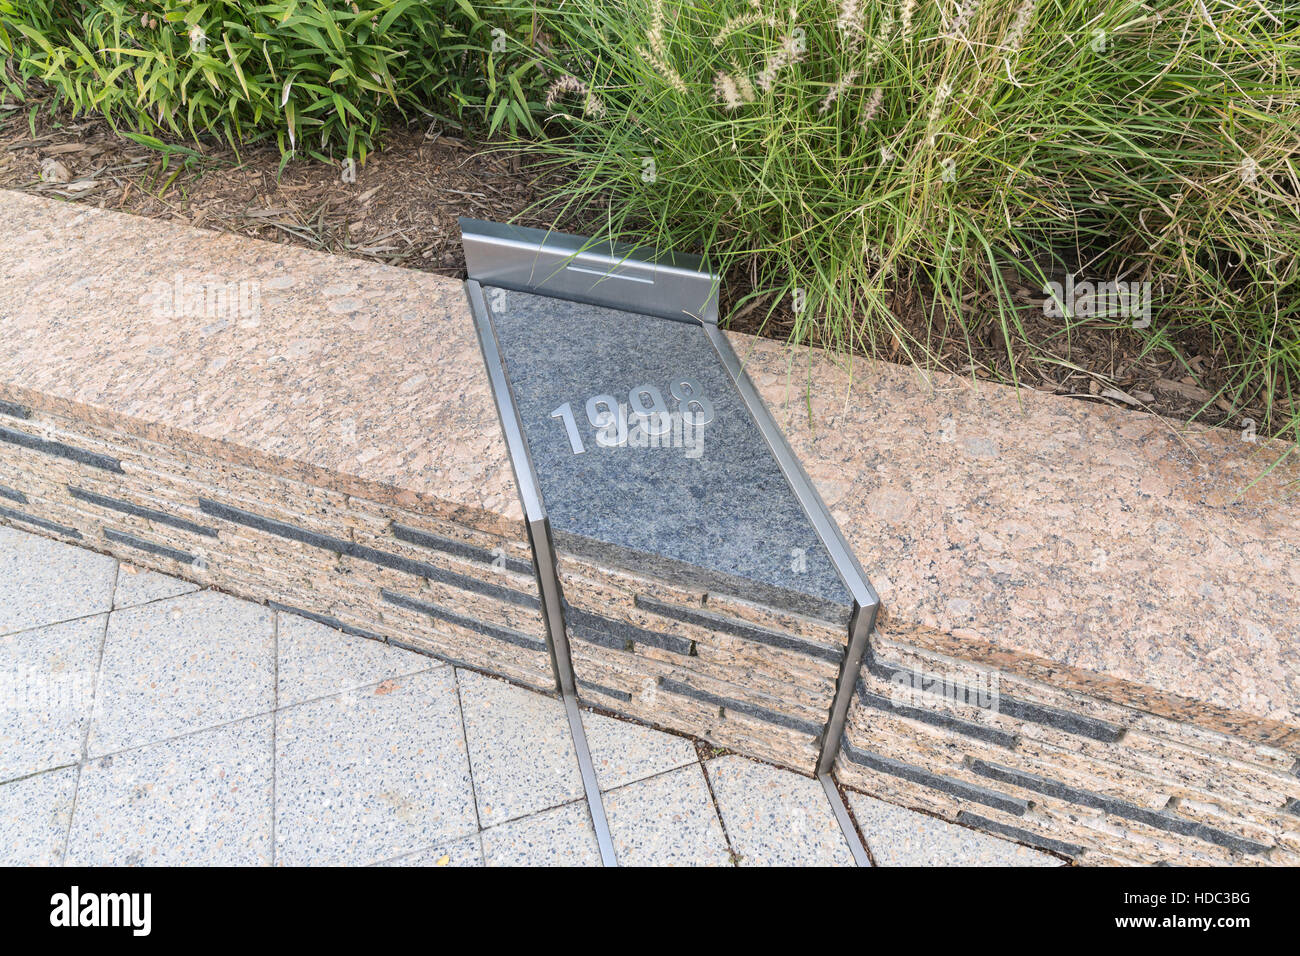 The benches in memory of those who lost their lives - no inscriptions shown - the Pentagon Memorial Stock Photo